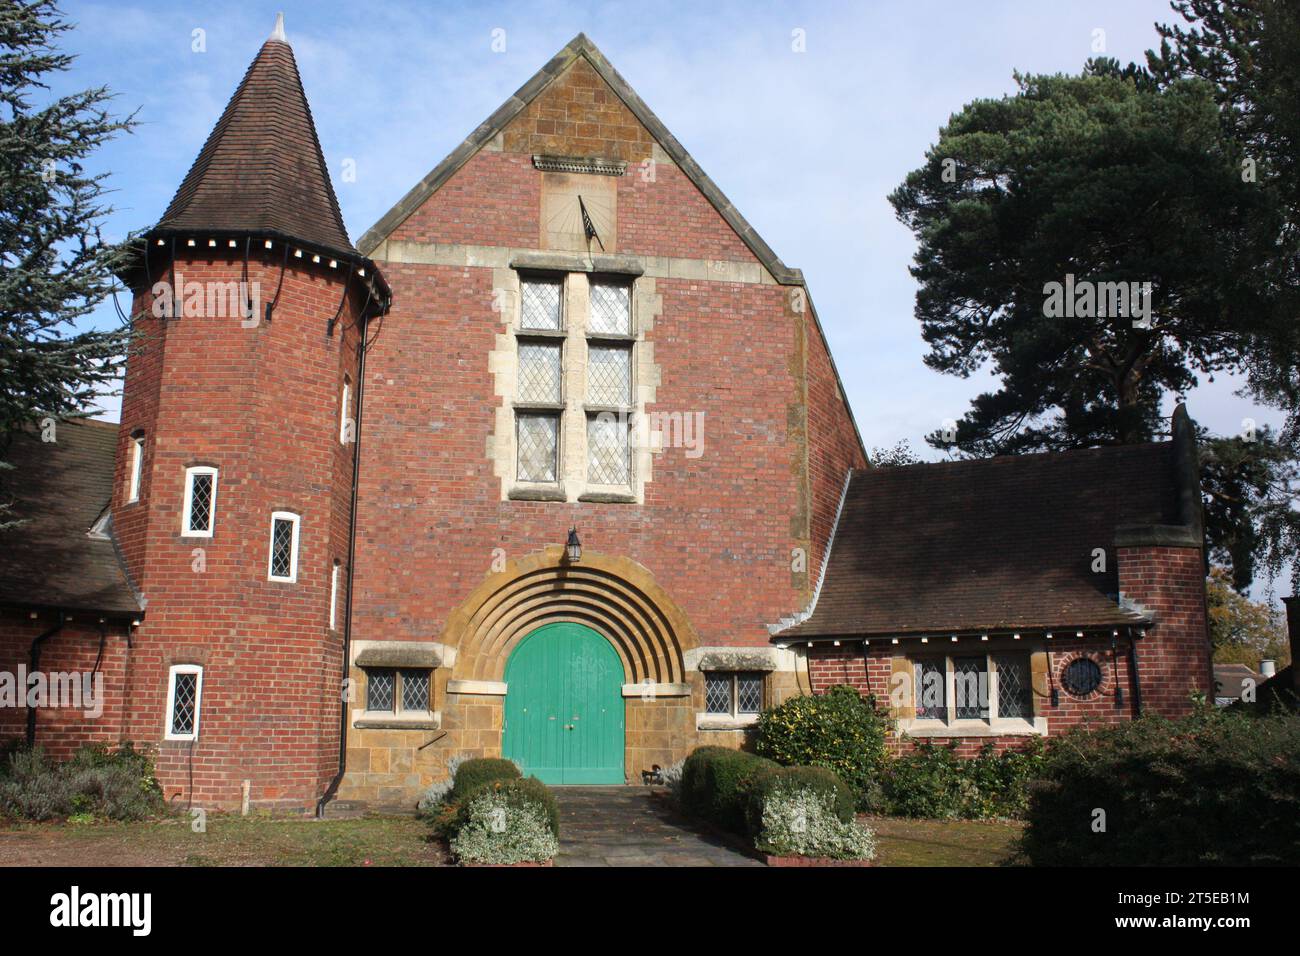 The Quaker Meeting House in Bournville Village, Birmingham Stock Photo